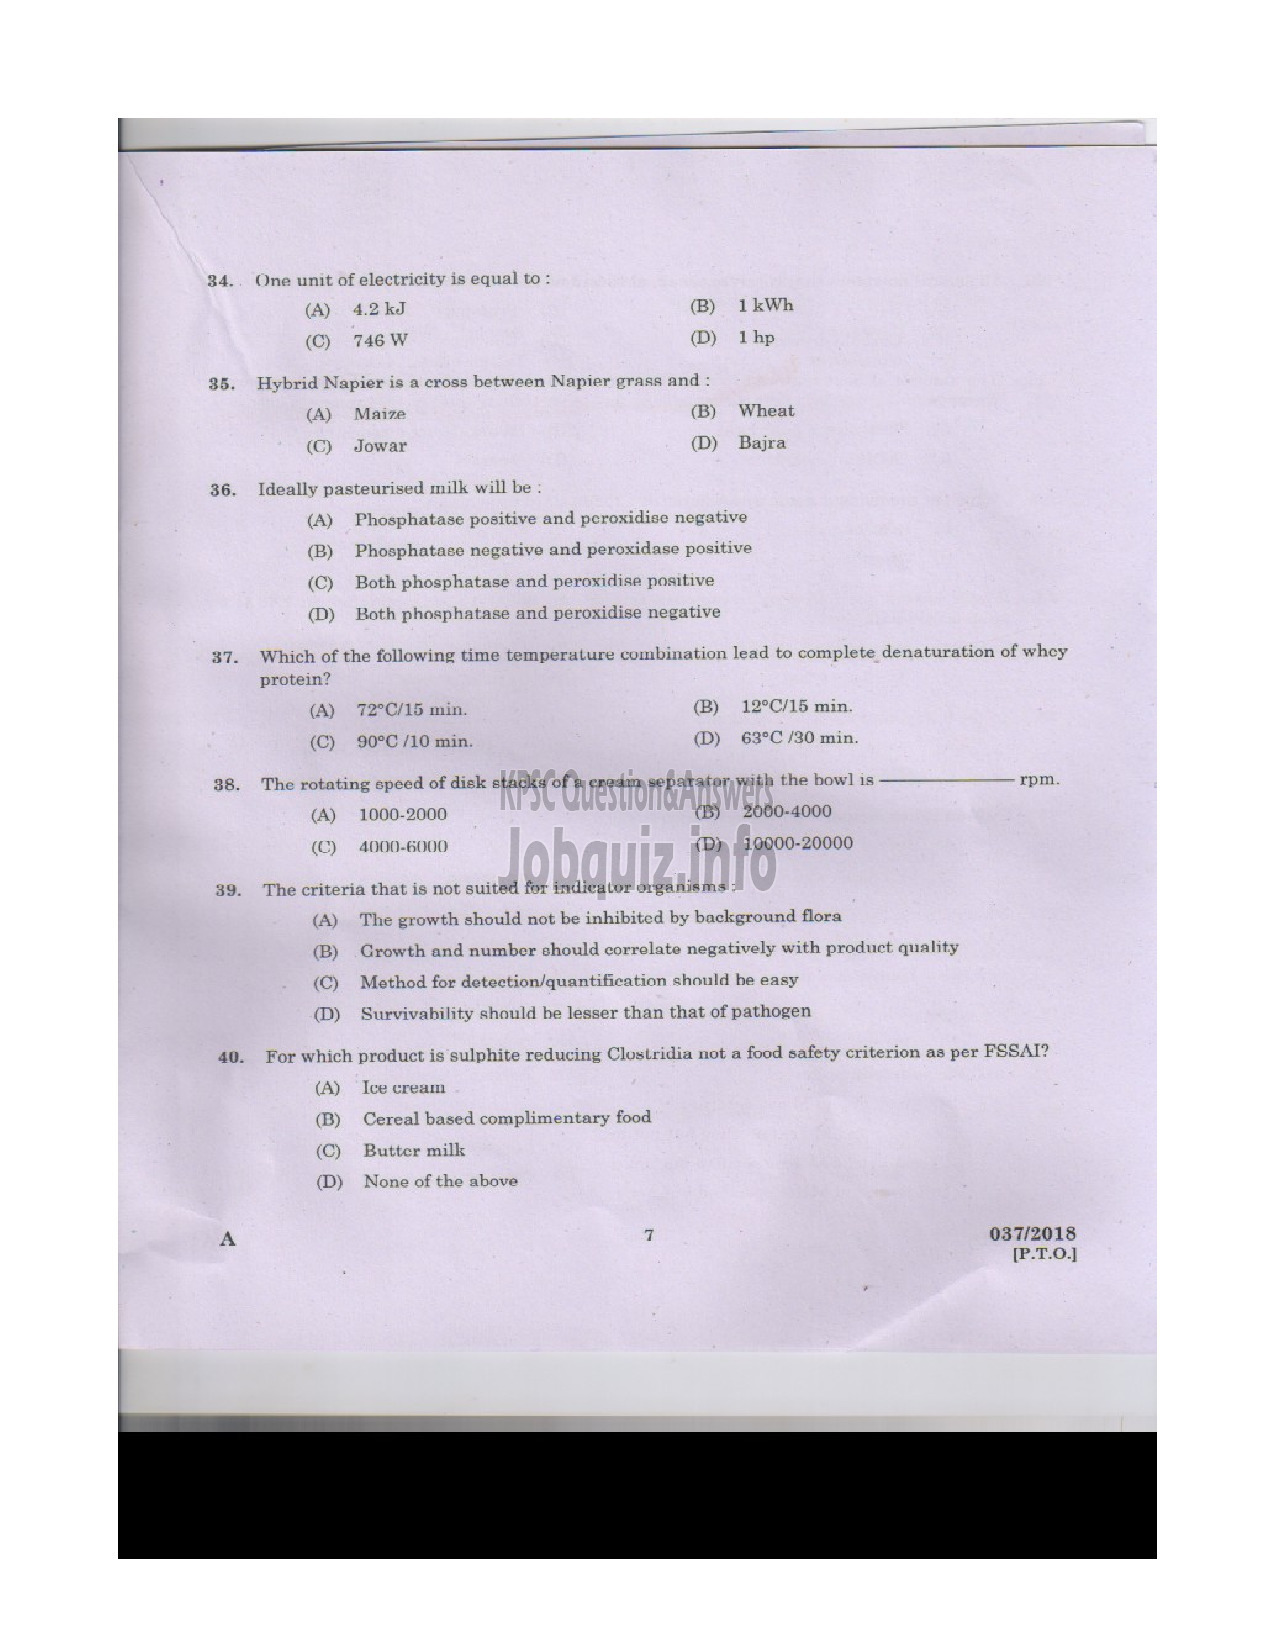 Kerala PSC Question Paper - VOCATIONAL INSTRUCTOR IN DAIRYING MILK PRODUCTS VHSE-6